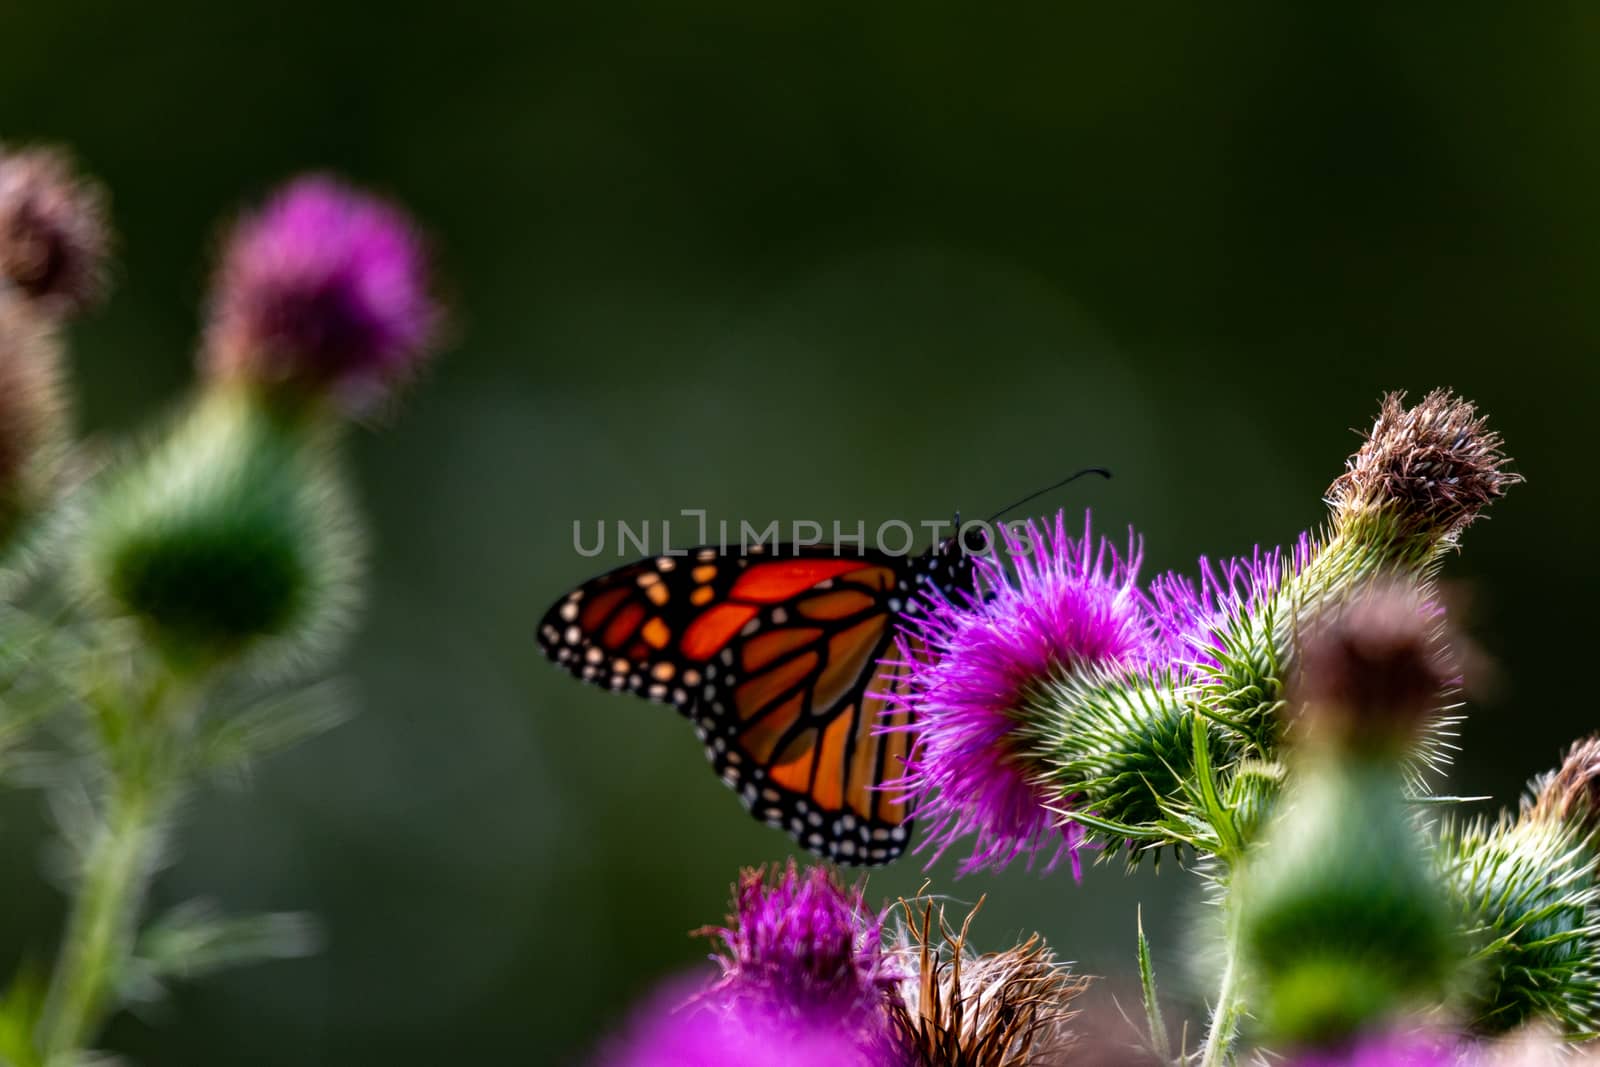 Monarch on Thistle. A large monarch butterfly on purple thistle